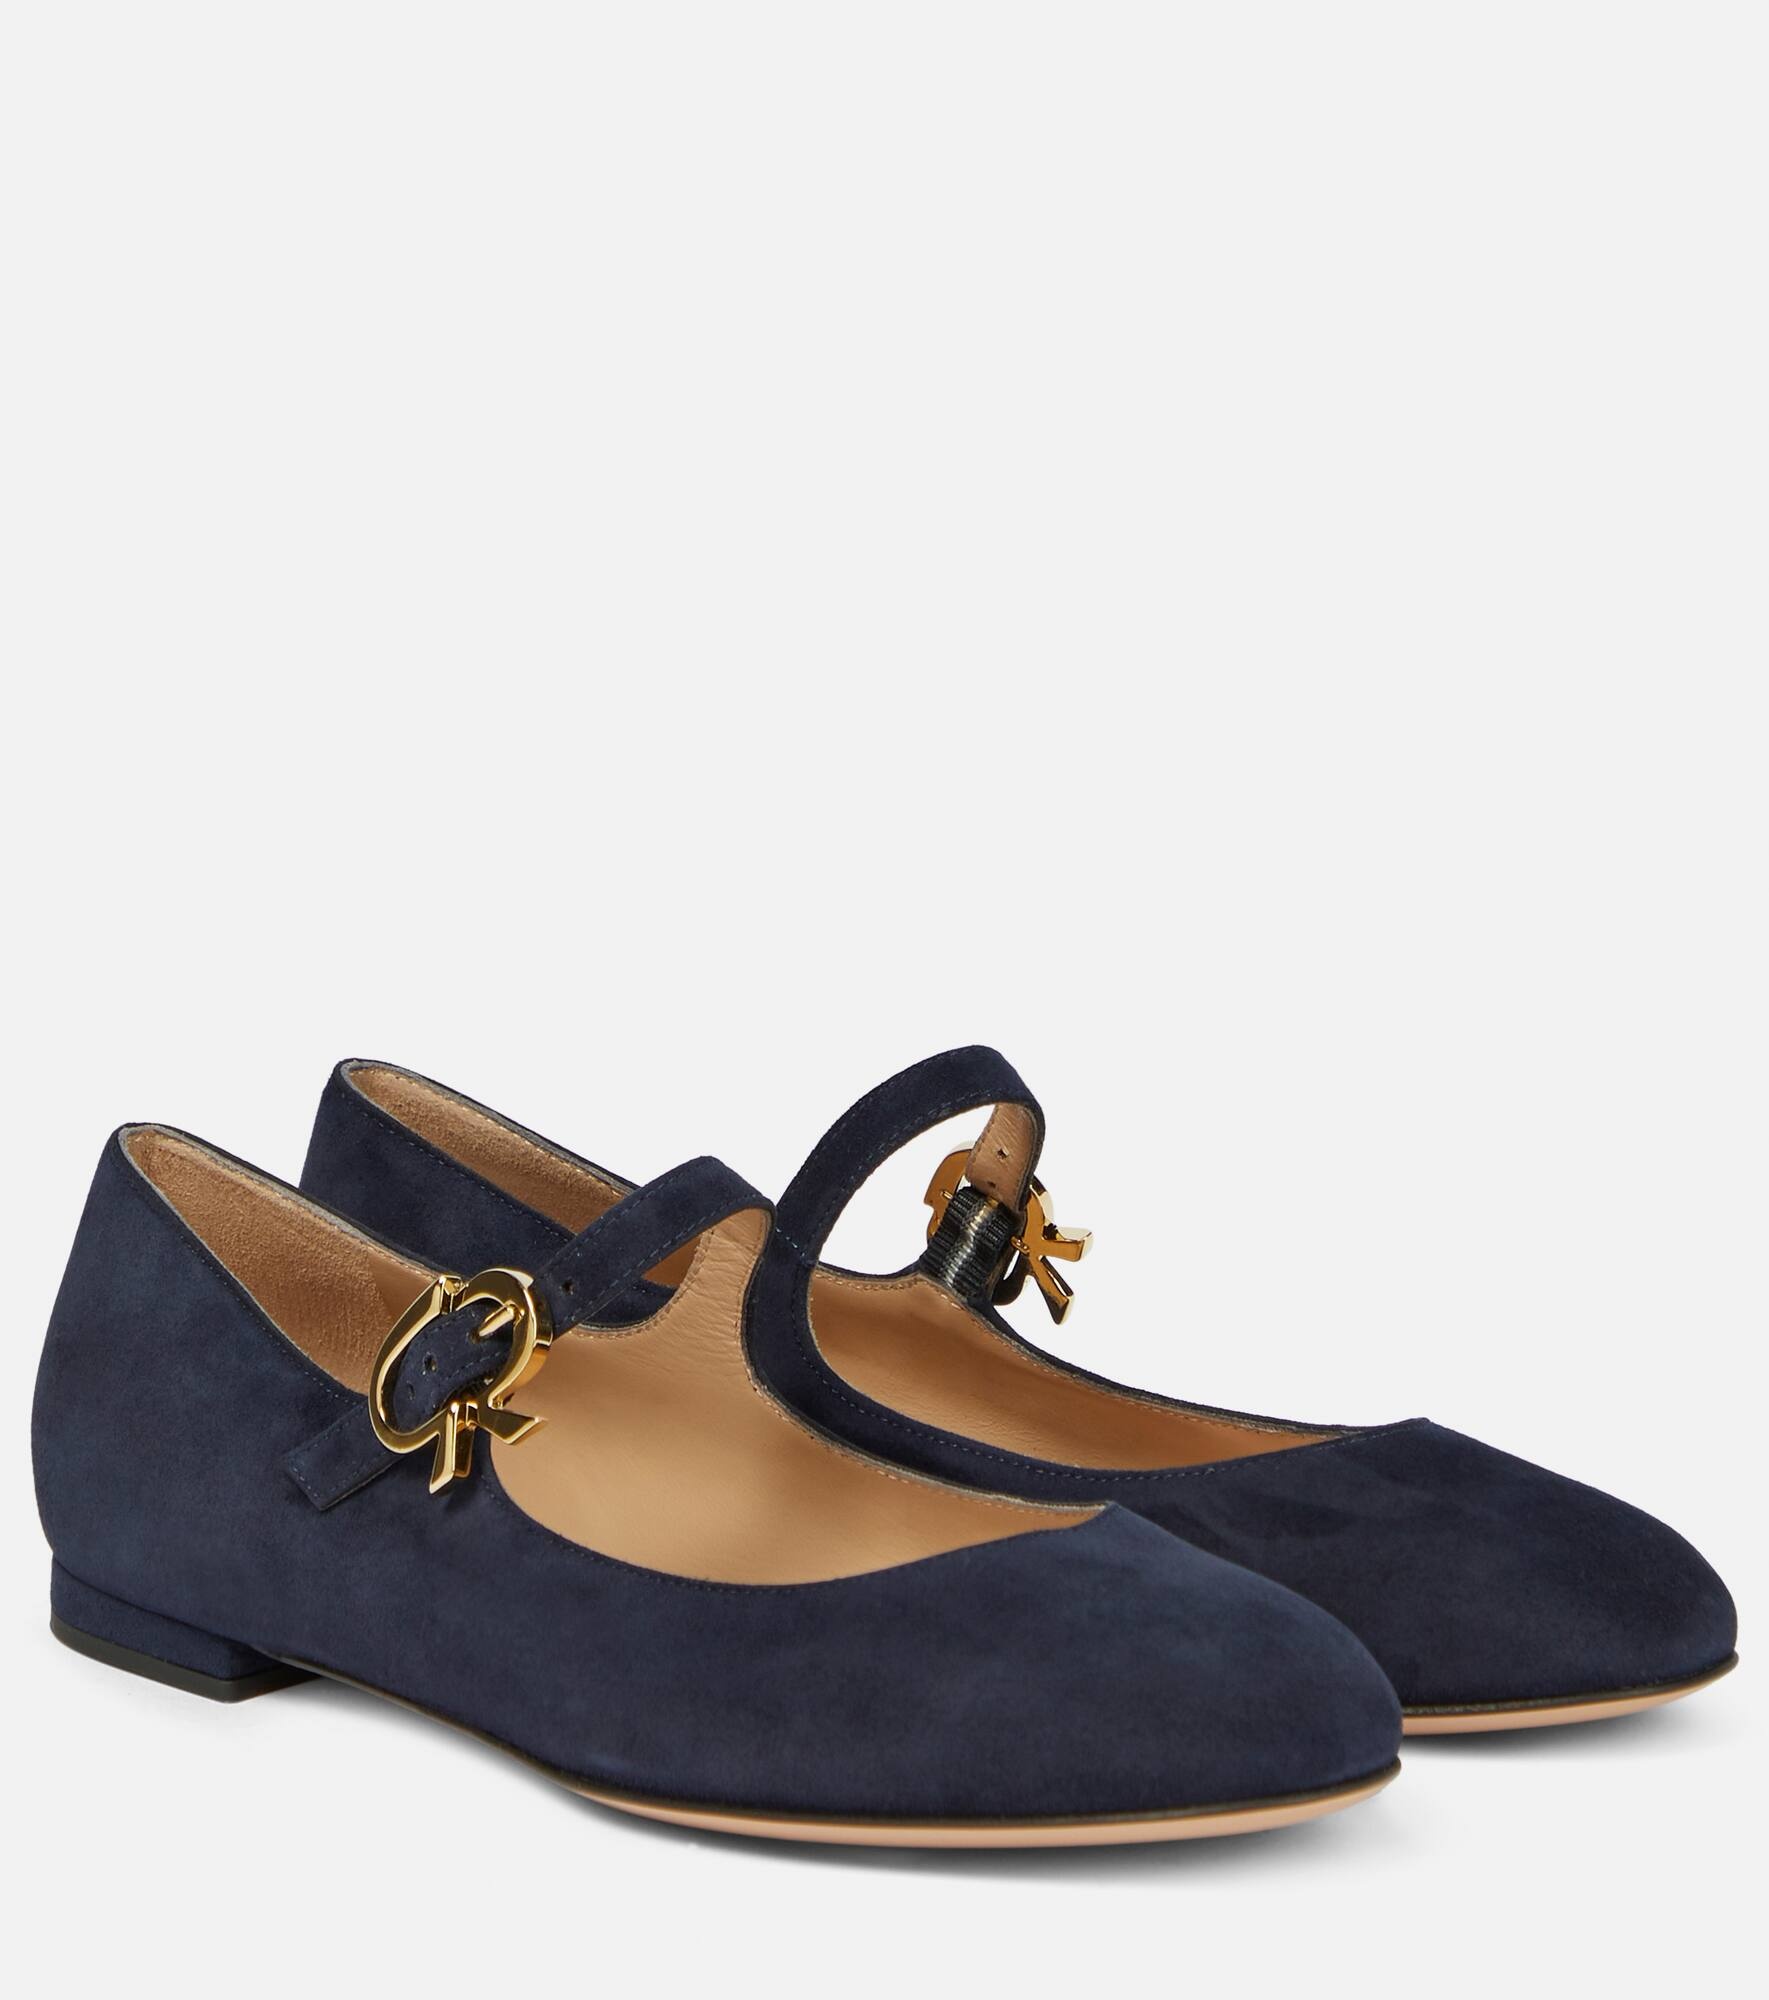 Mary Ribbon suede ballet flats - 1